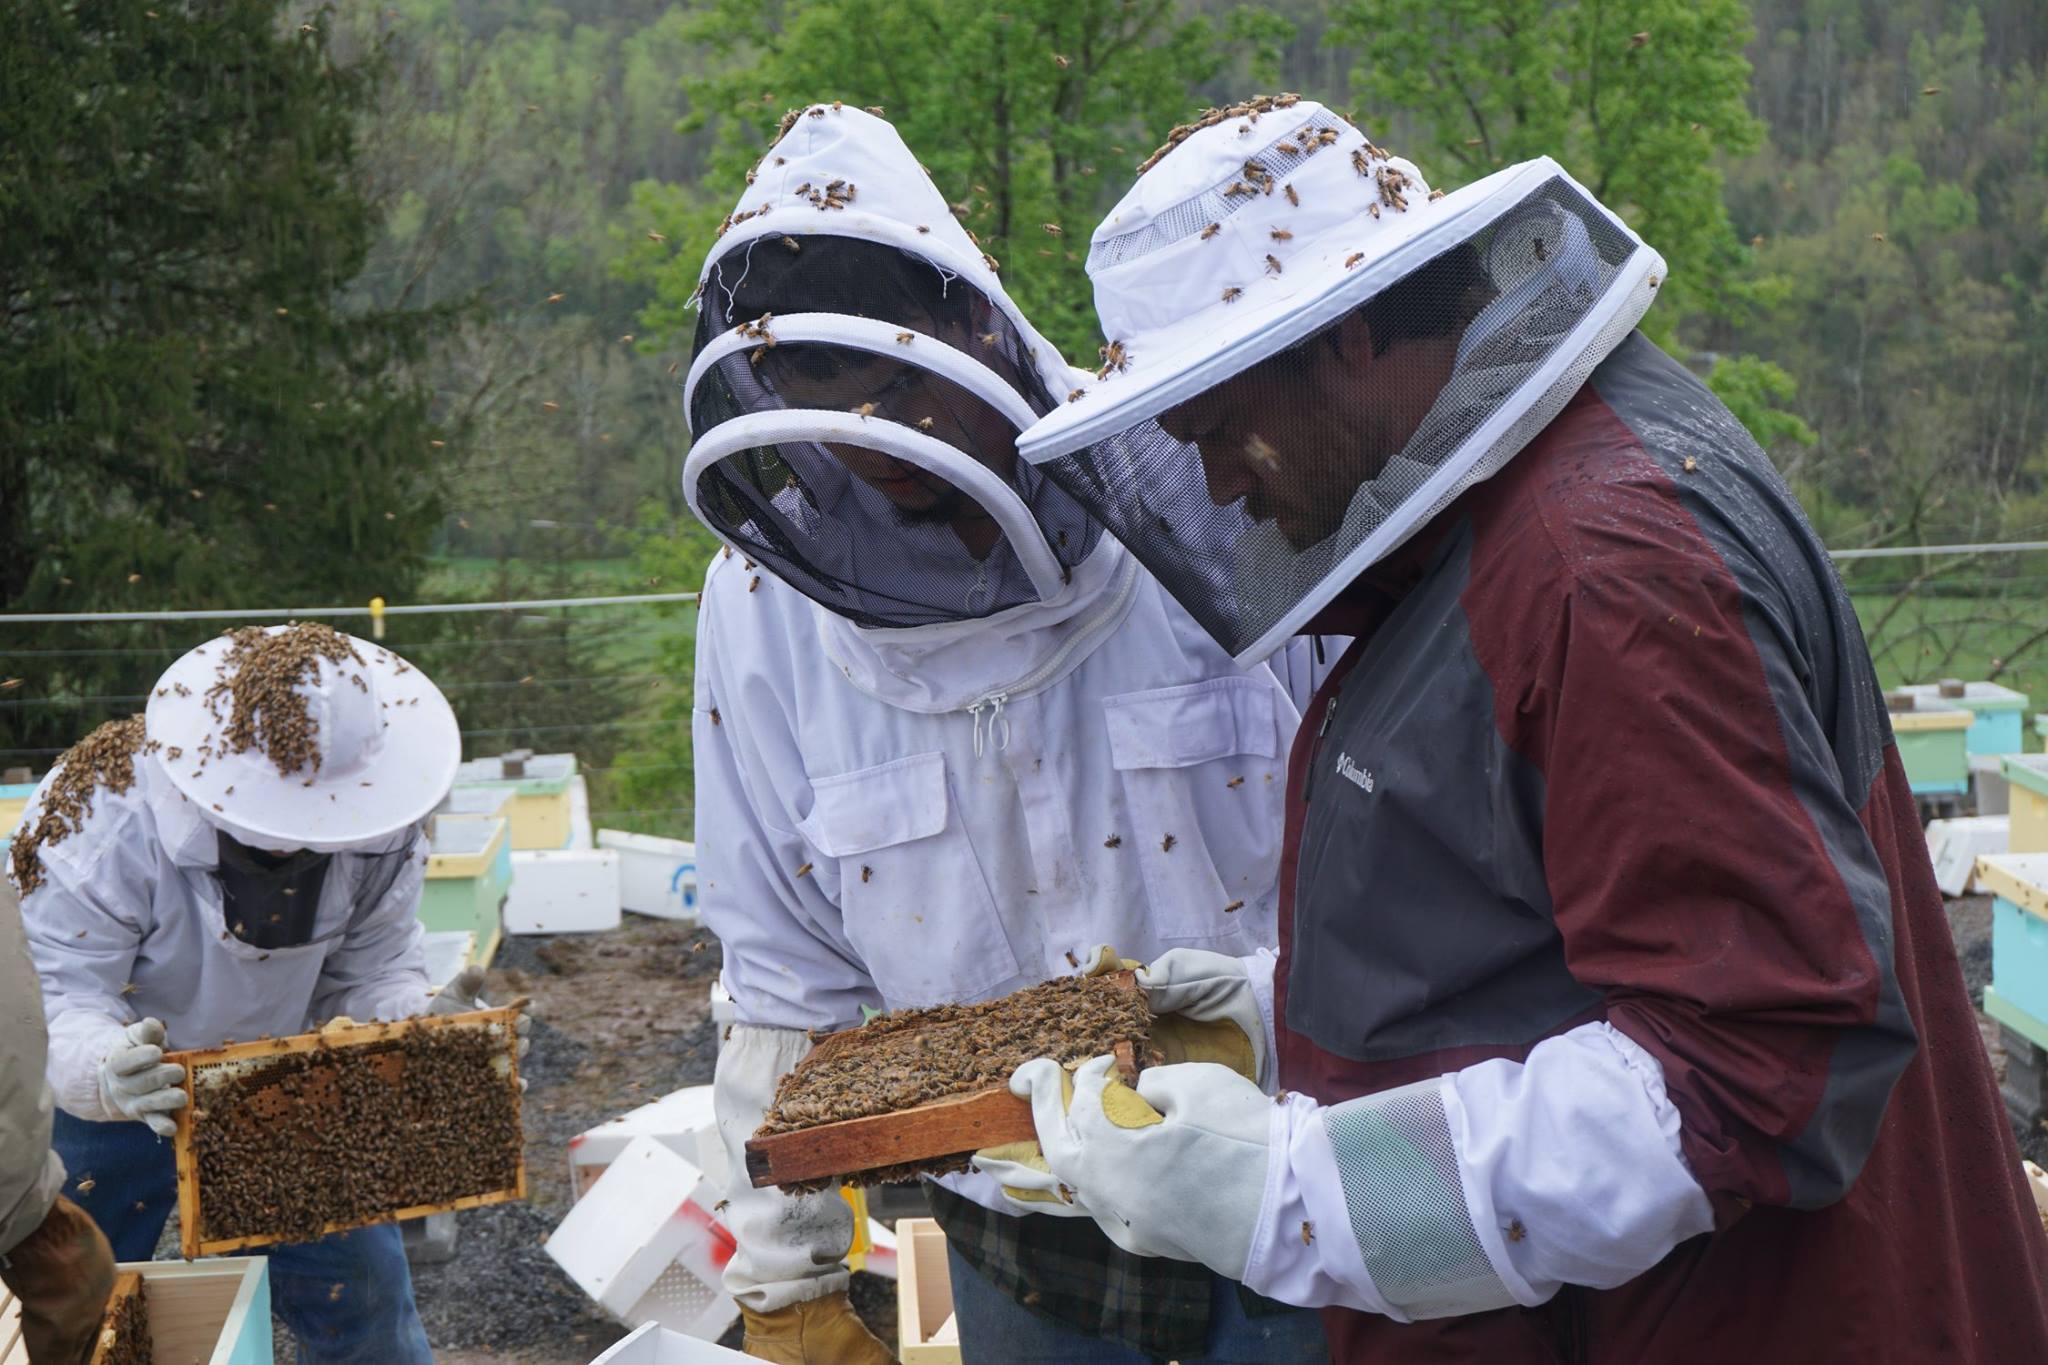 Beekeeping can be a great way to earn a sustainable living in rural areas, but the start-up costs and learning curve can be steep. Their program provides the materials and support necessary to overcome the considerable barriers to getting started. ABC keep the continued costs of operating low through collective processing and marketing.